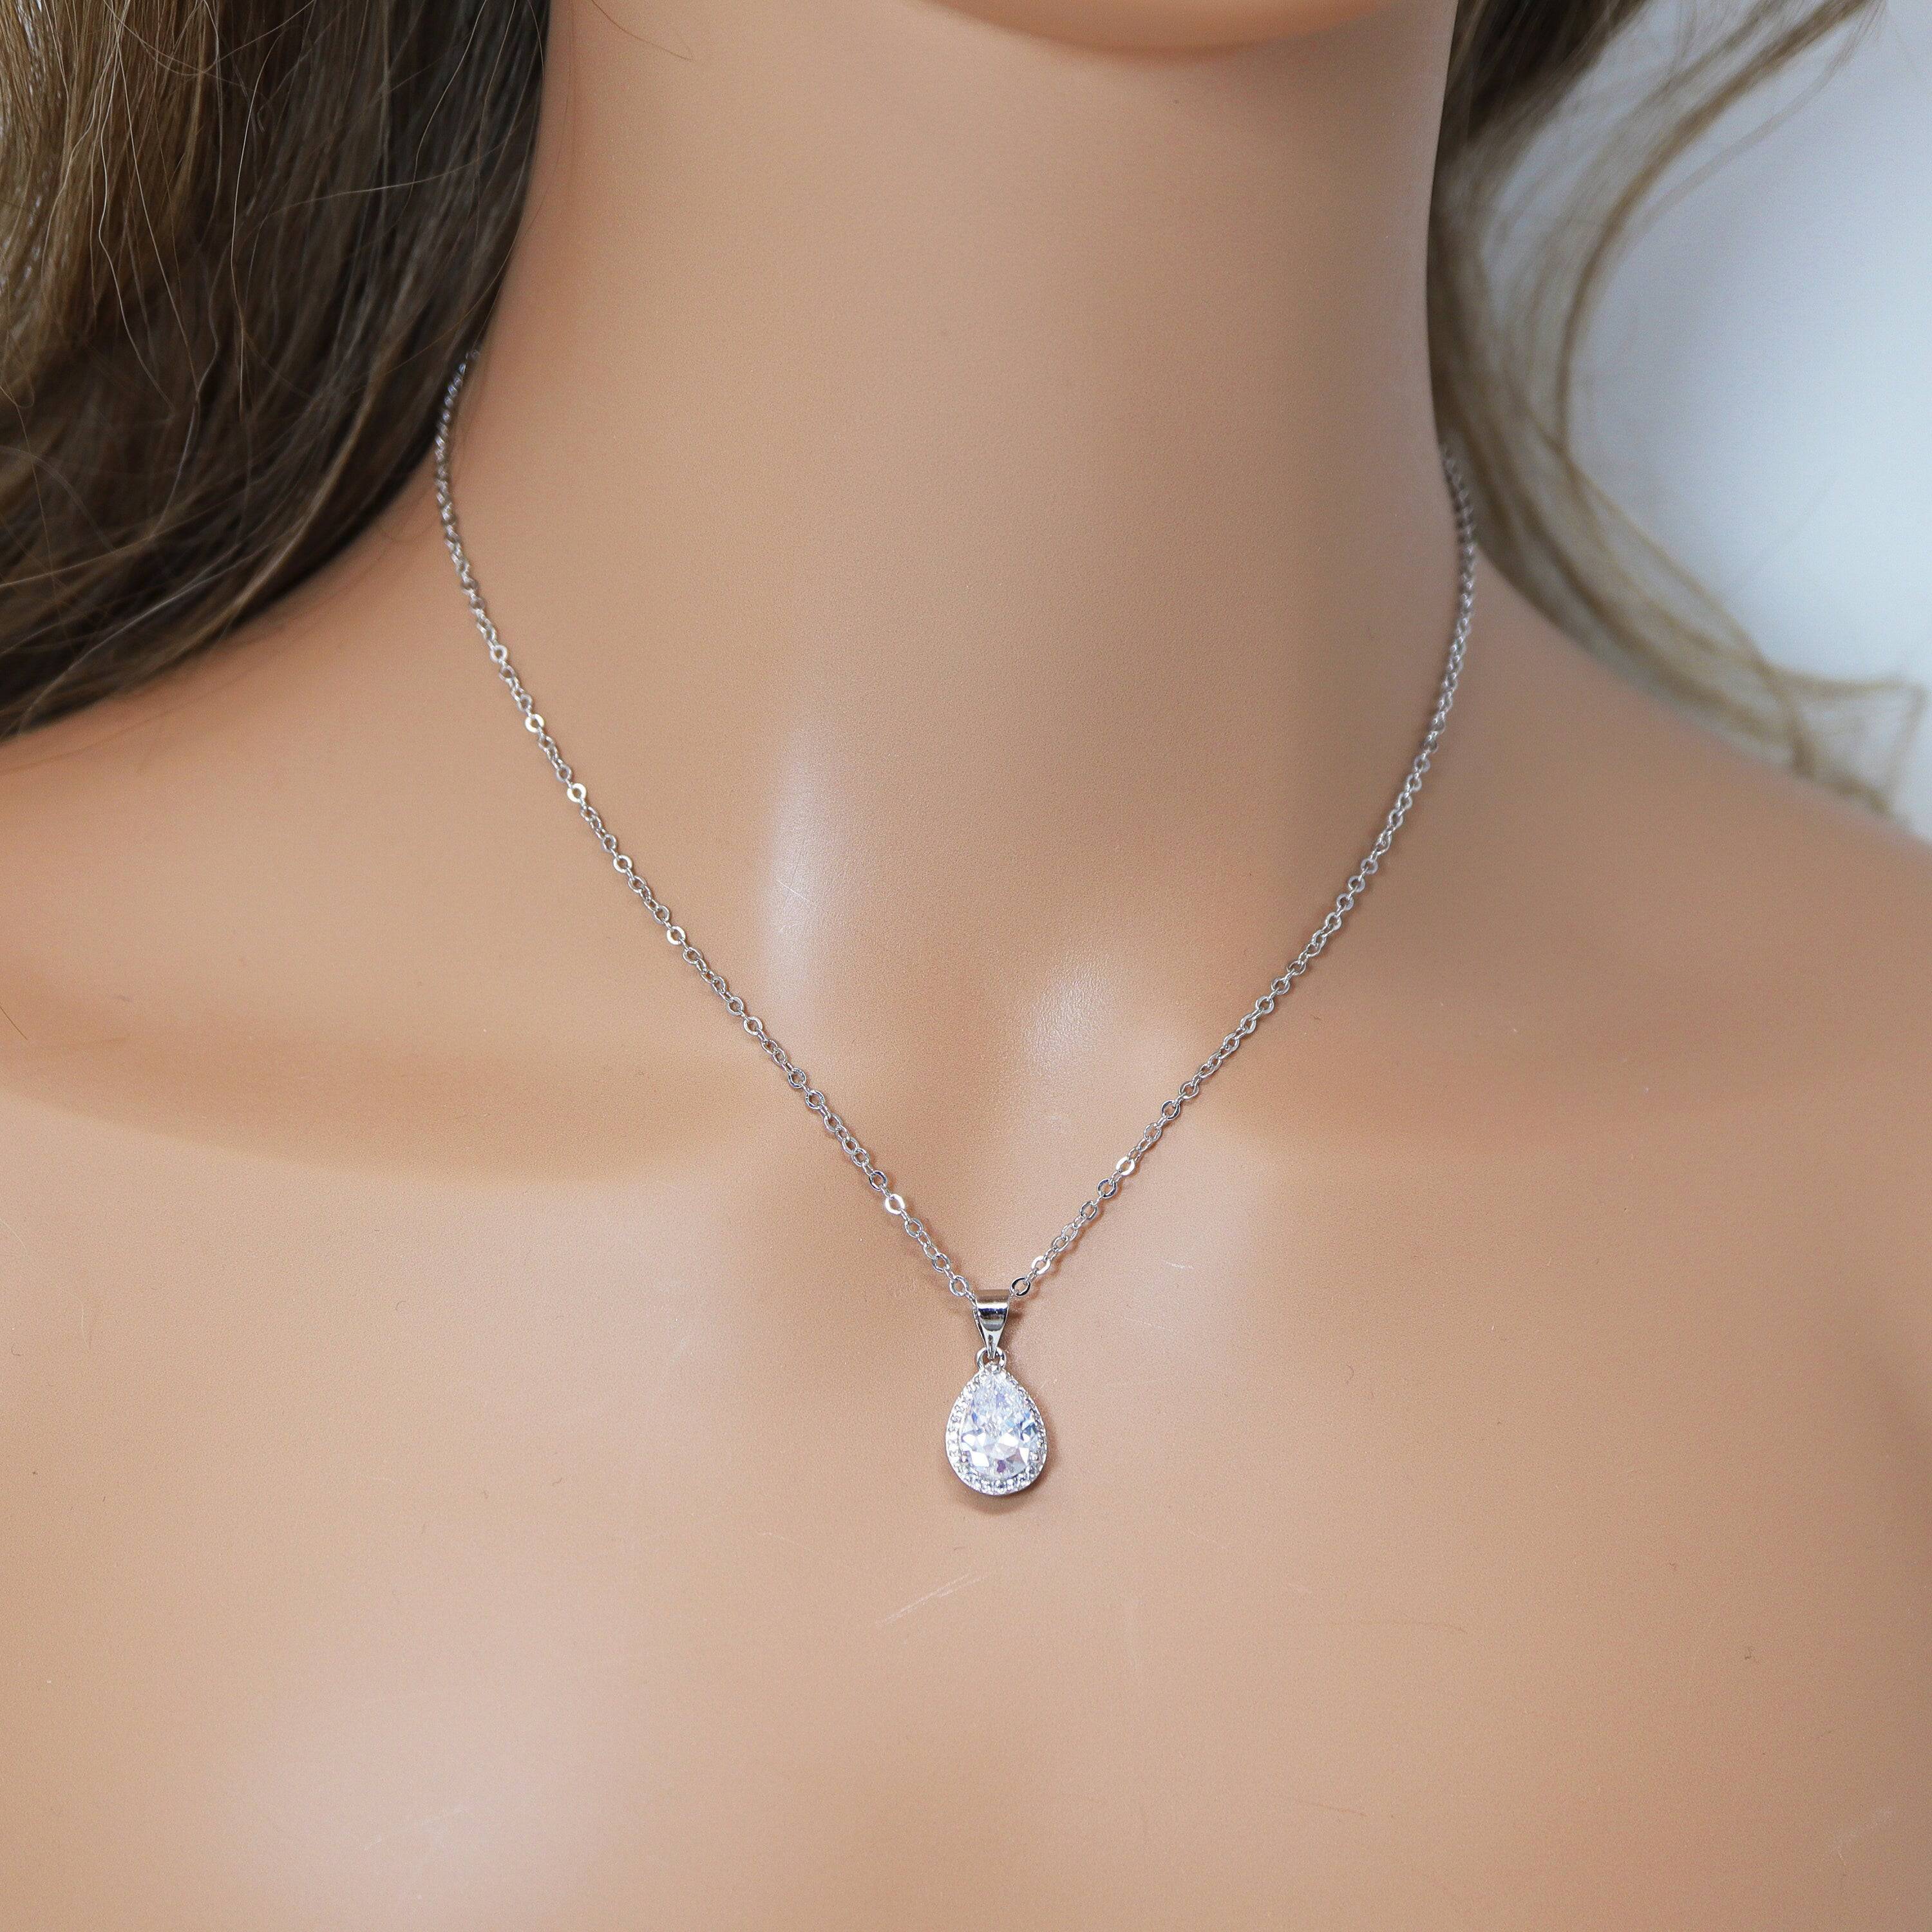 Auth Swarovski Double Solitaire Crystal Pendant Necklace Earring Jewelry Set  | eBay